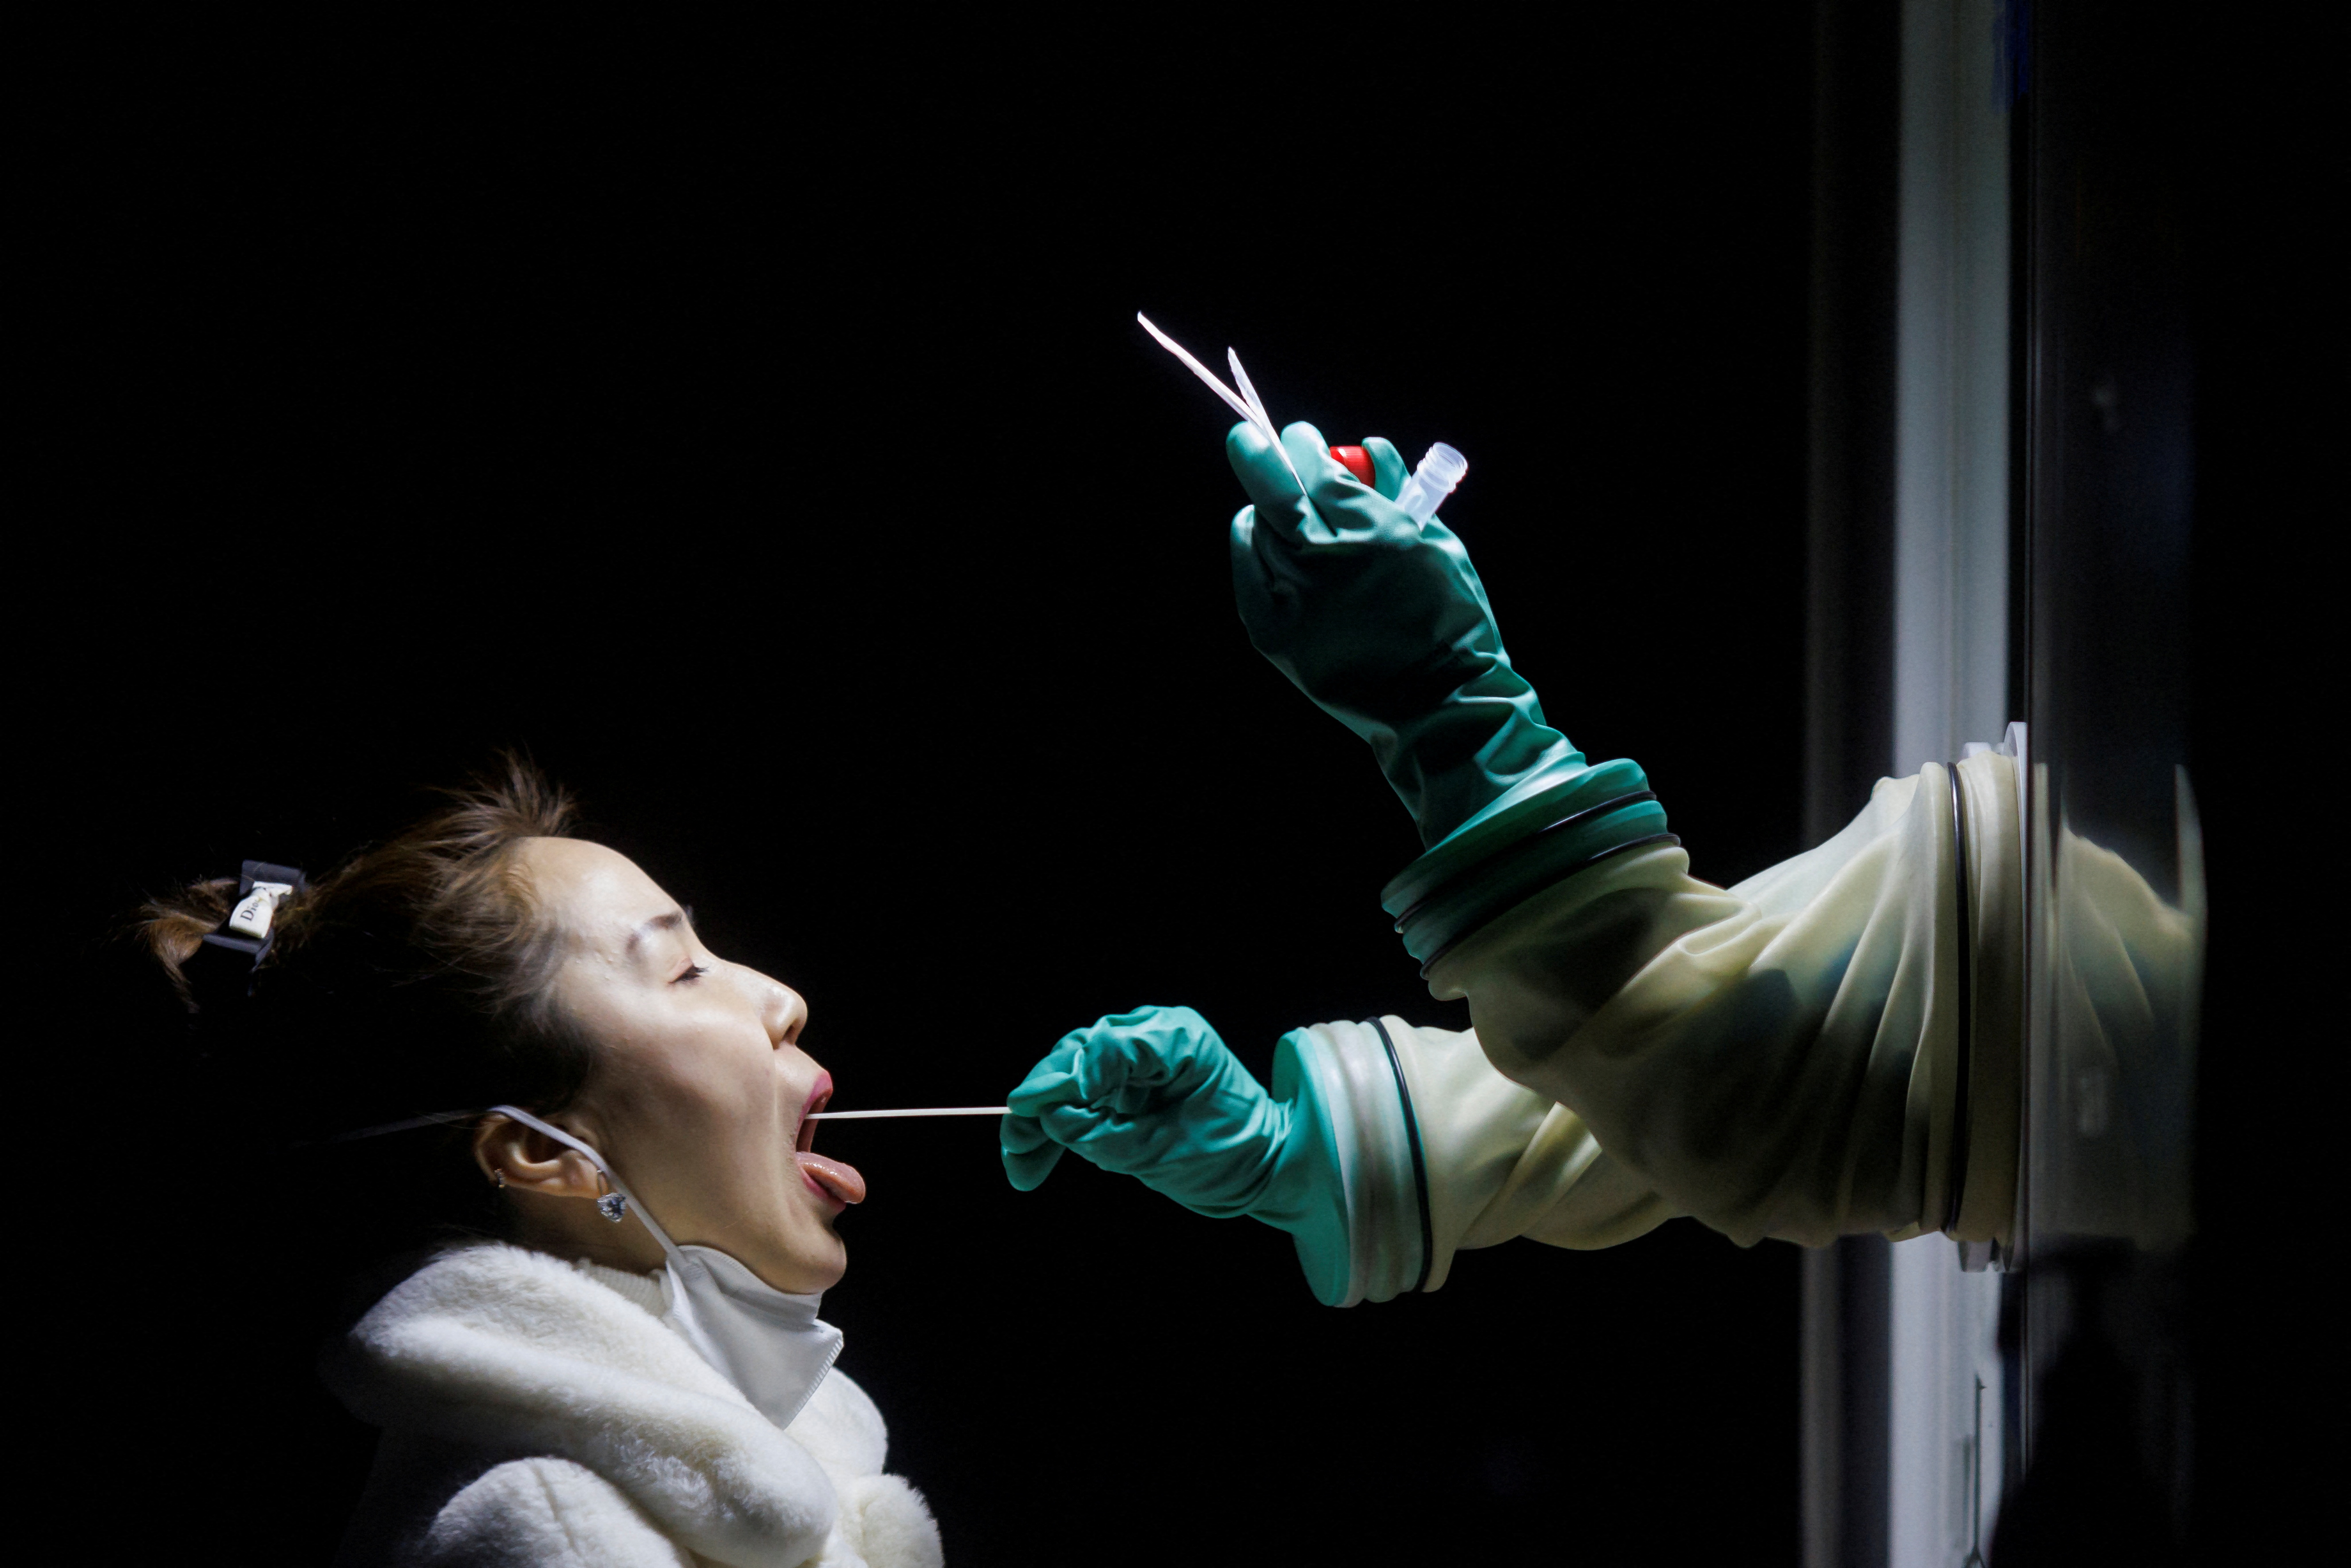 A woman receives a throat swab test at a street booth as the coronavirus disease (COVID-19) pandemic continues in Beijing, China, January 17, 2022. REUTERS/Thomas Peter     TPX IMAGES OF THE DAY